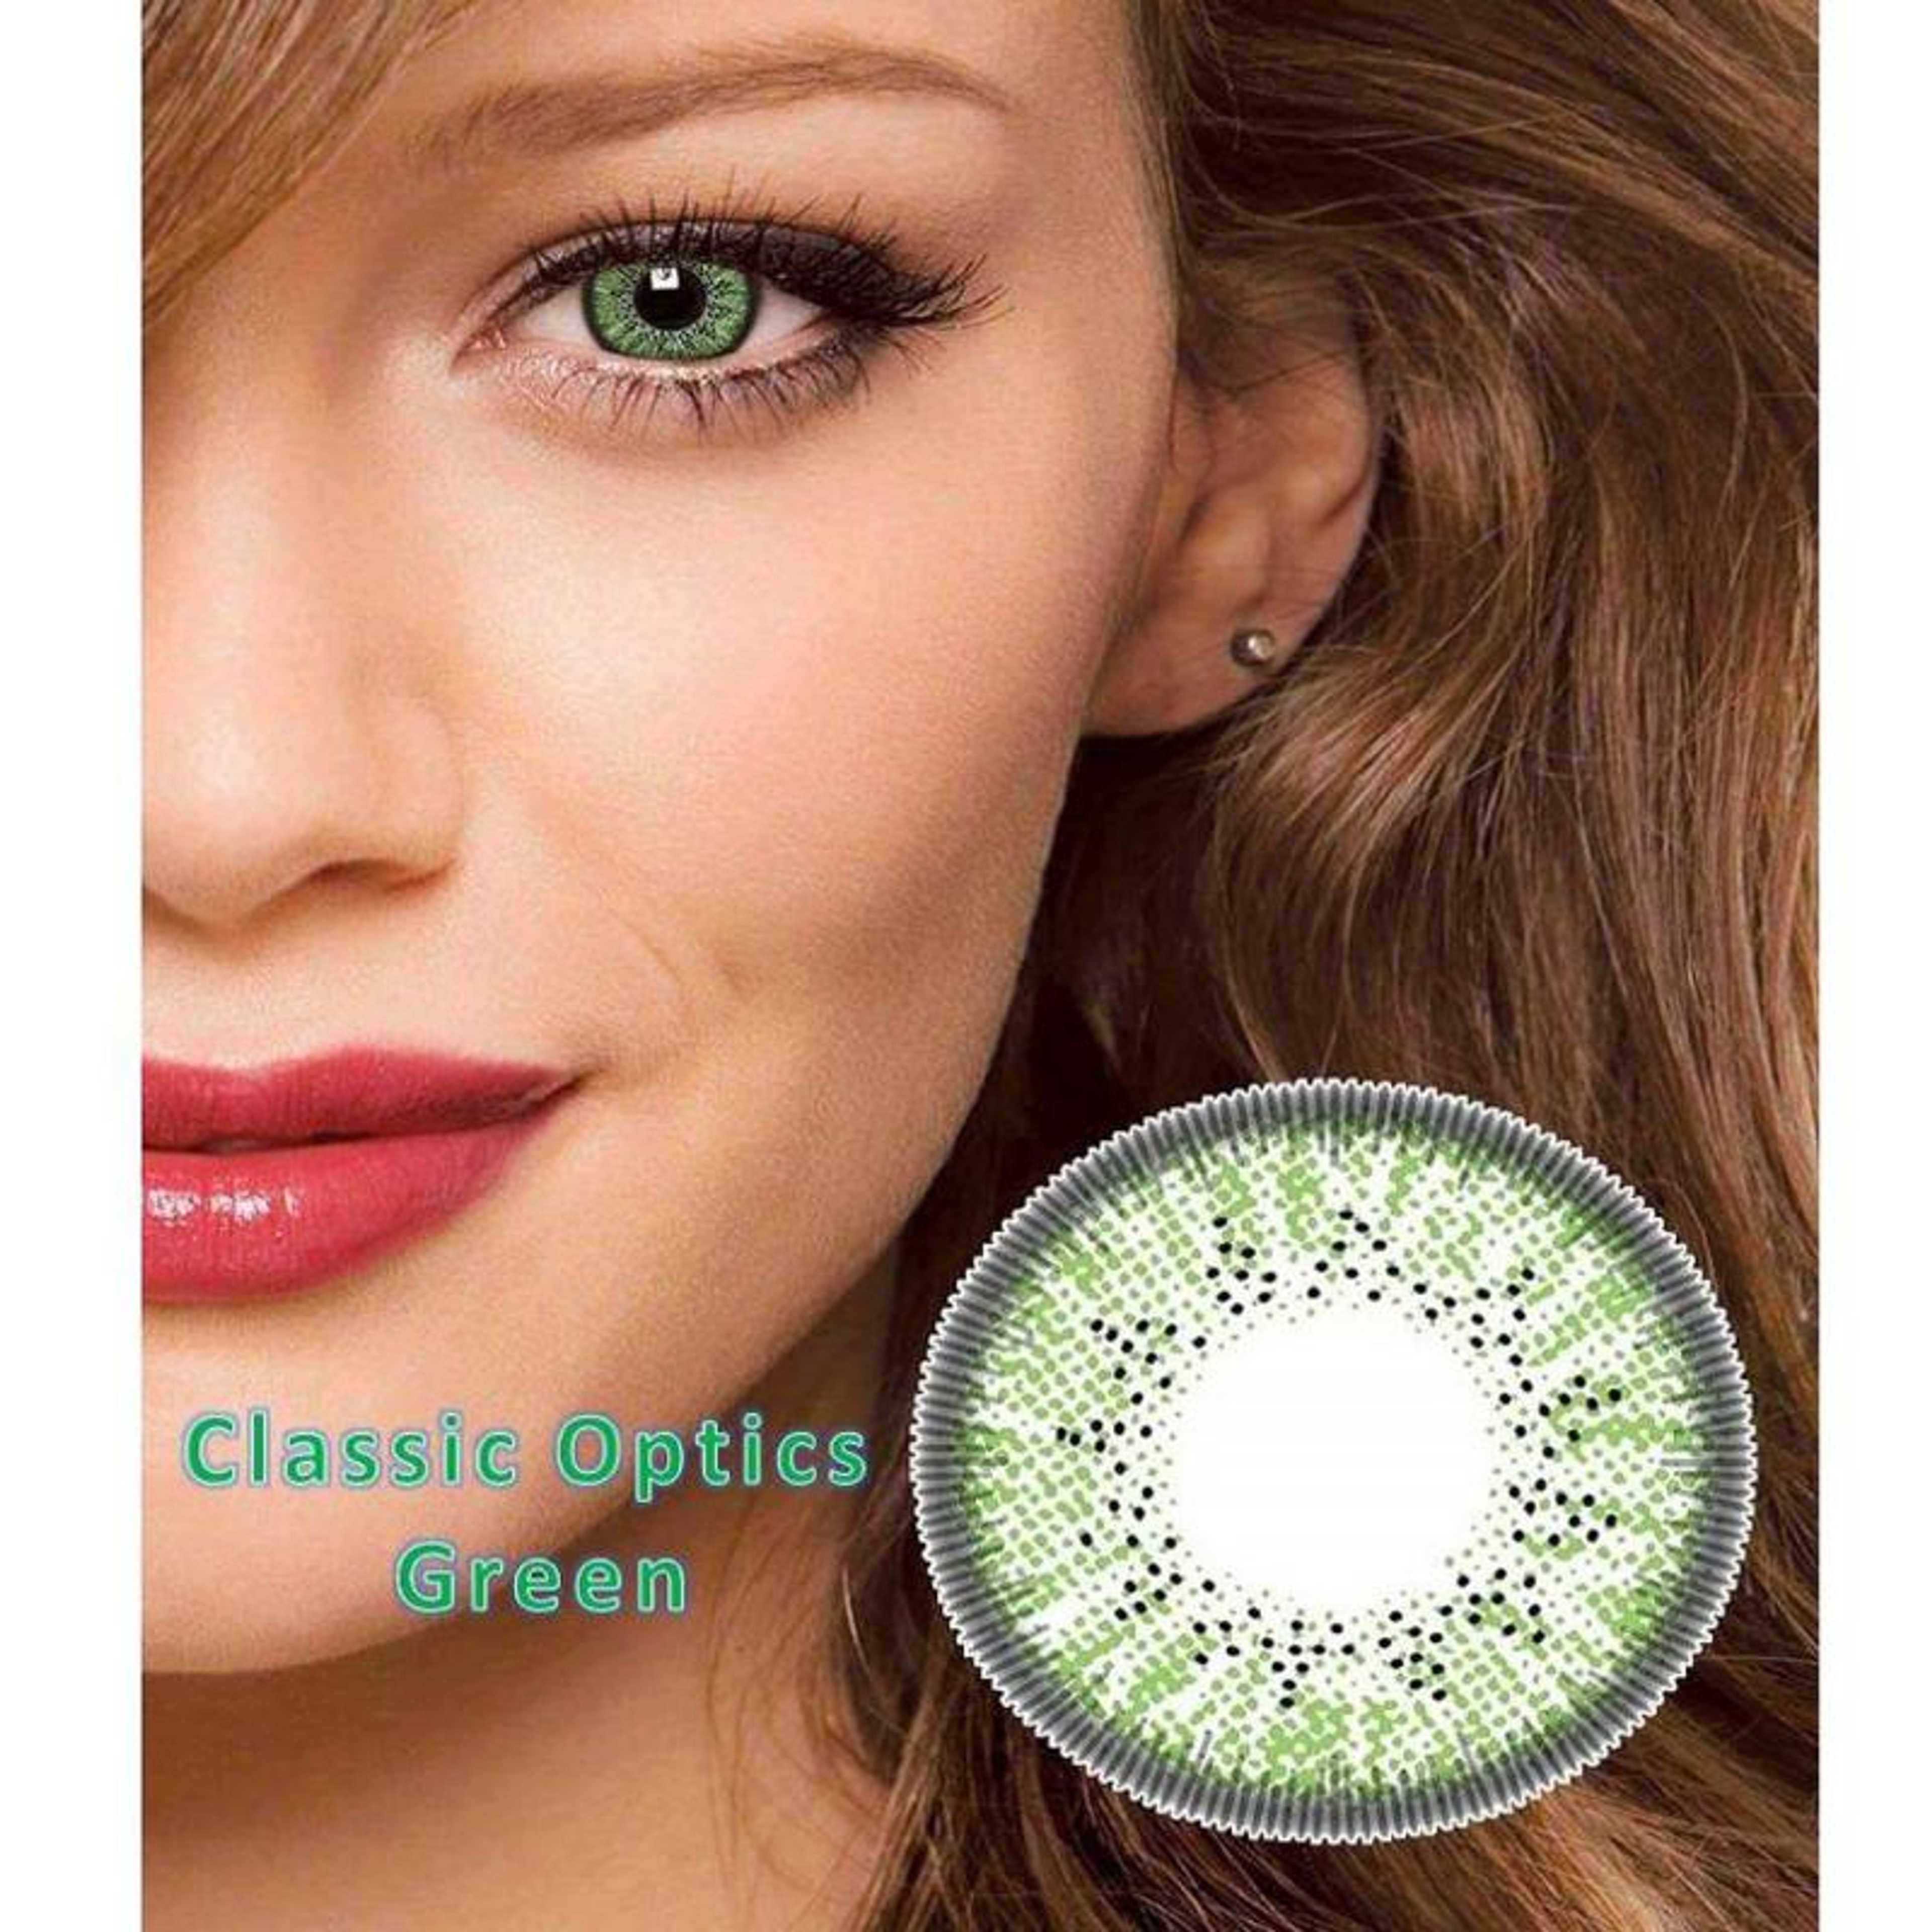 Green Double shade Contact Lenses-Bridal Colors